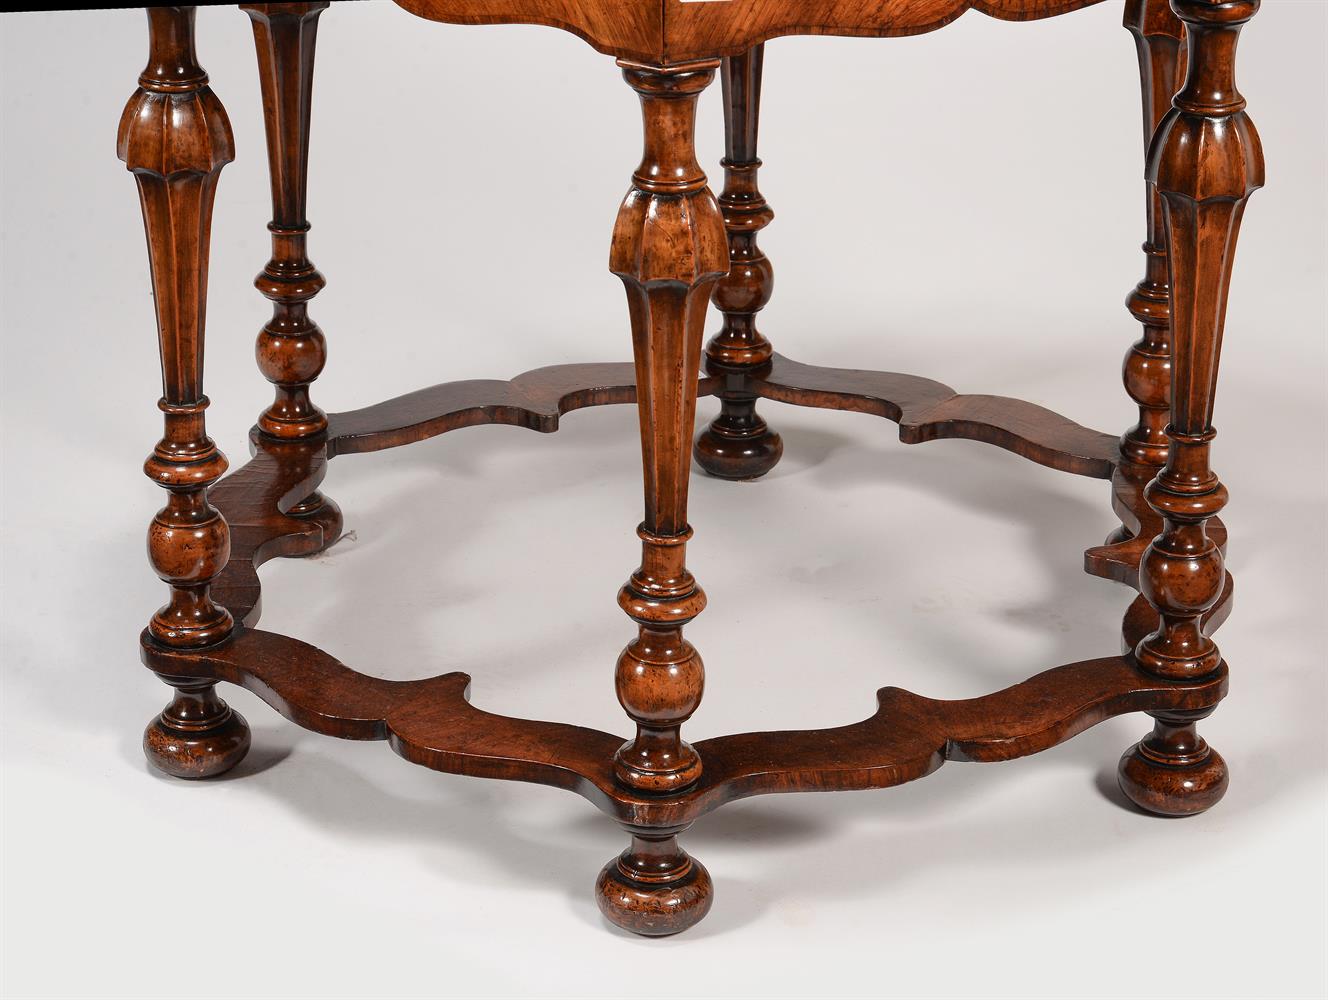 A WALNUT ROUND CENTRE TABLE IN 18TH CENTURY STYLE - Image 4 of 5